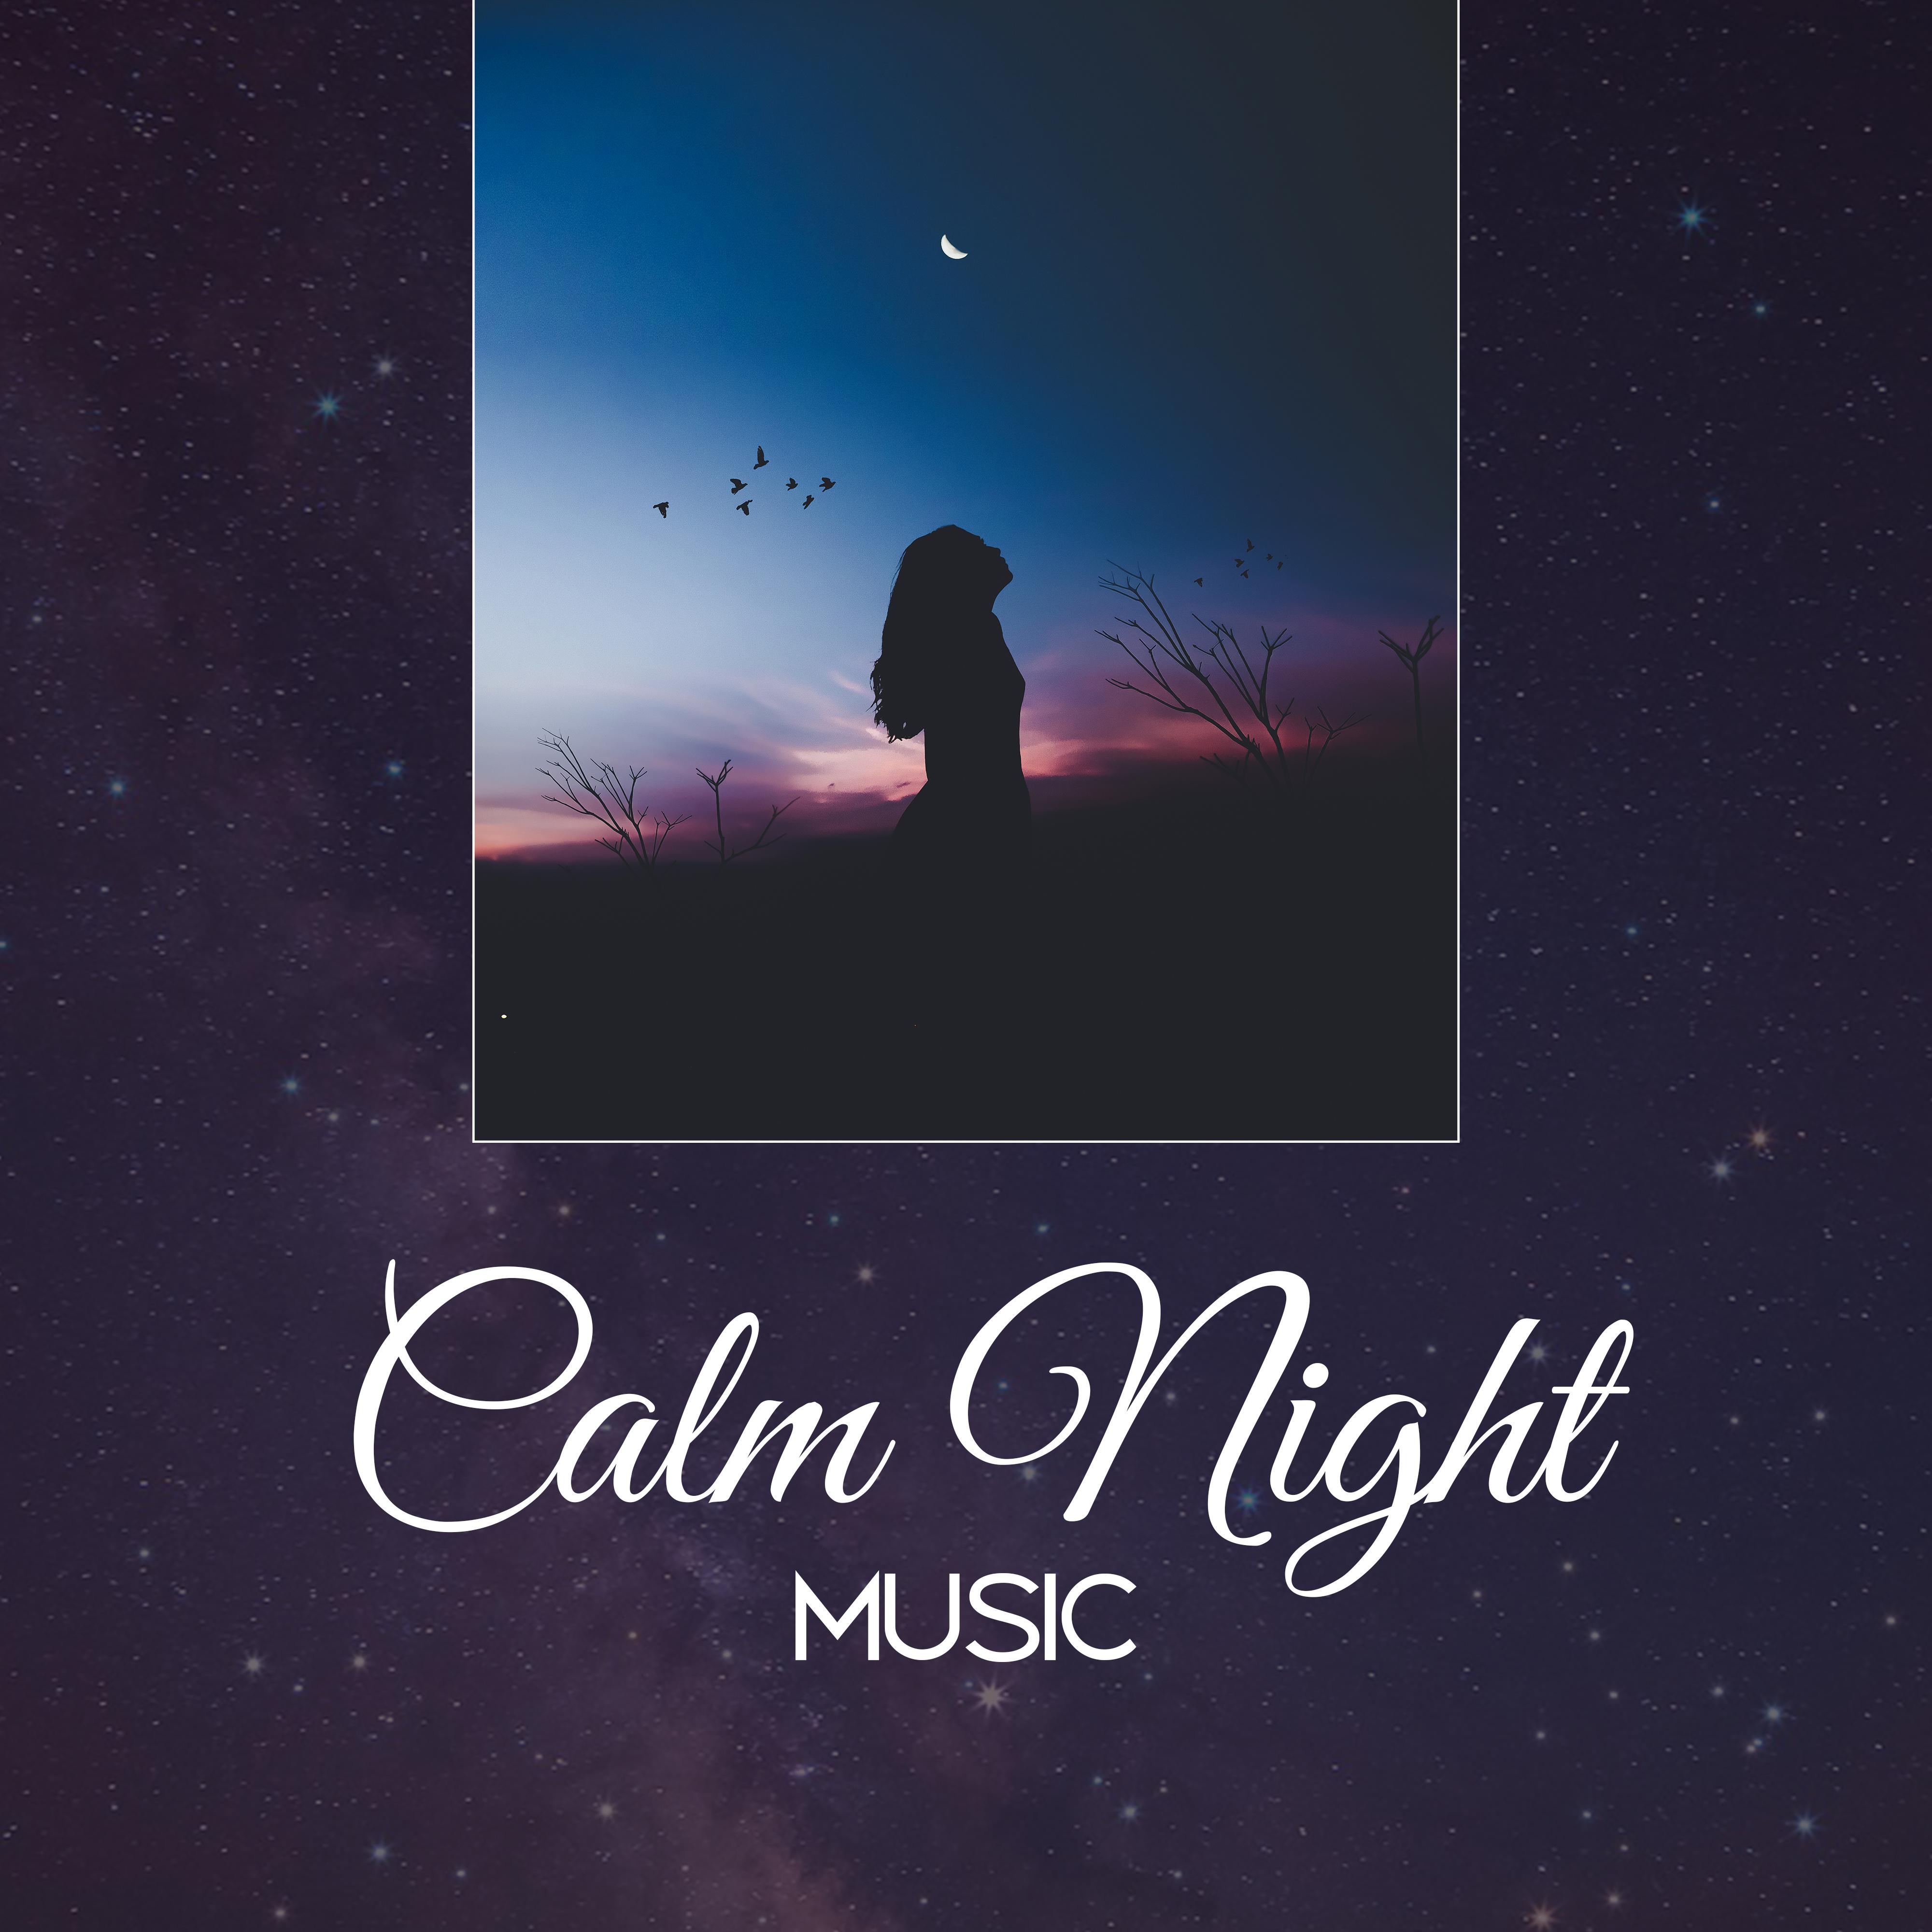 Calm Night Music  Music for Sleep, Relax  Chill, Relaxing Music 2017, Sounds of Nature